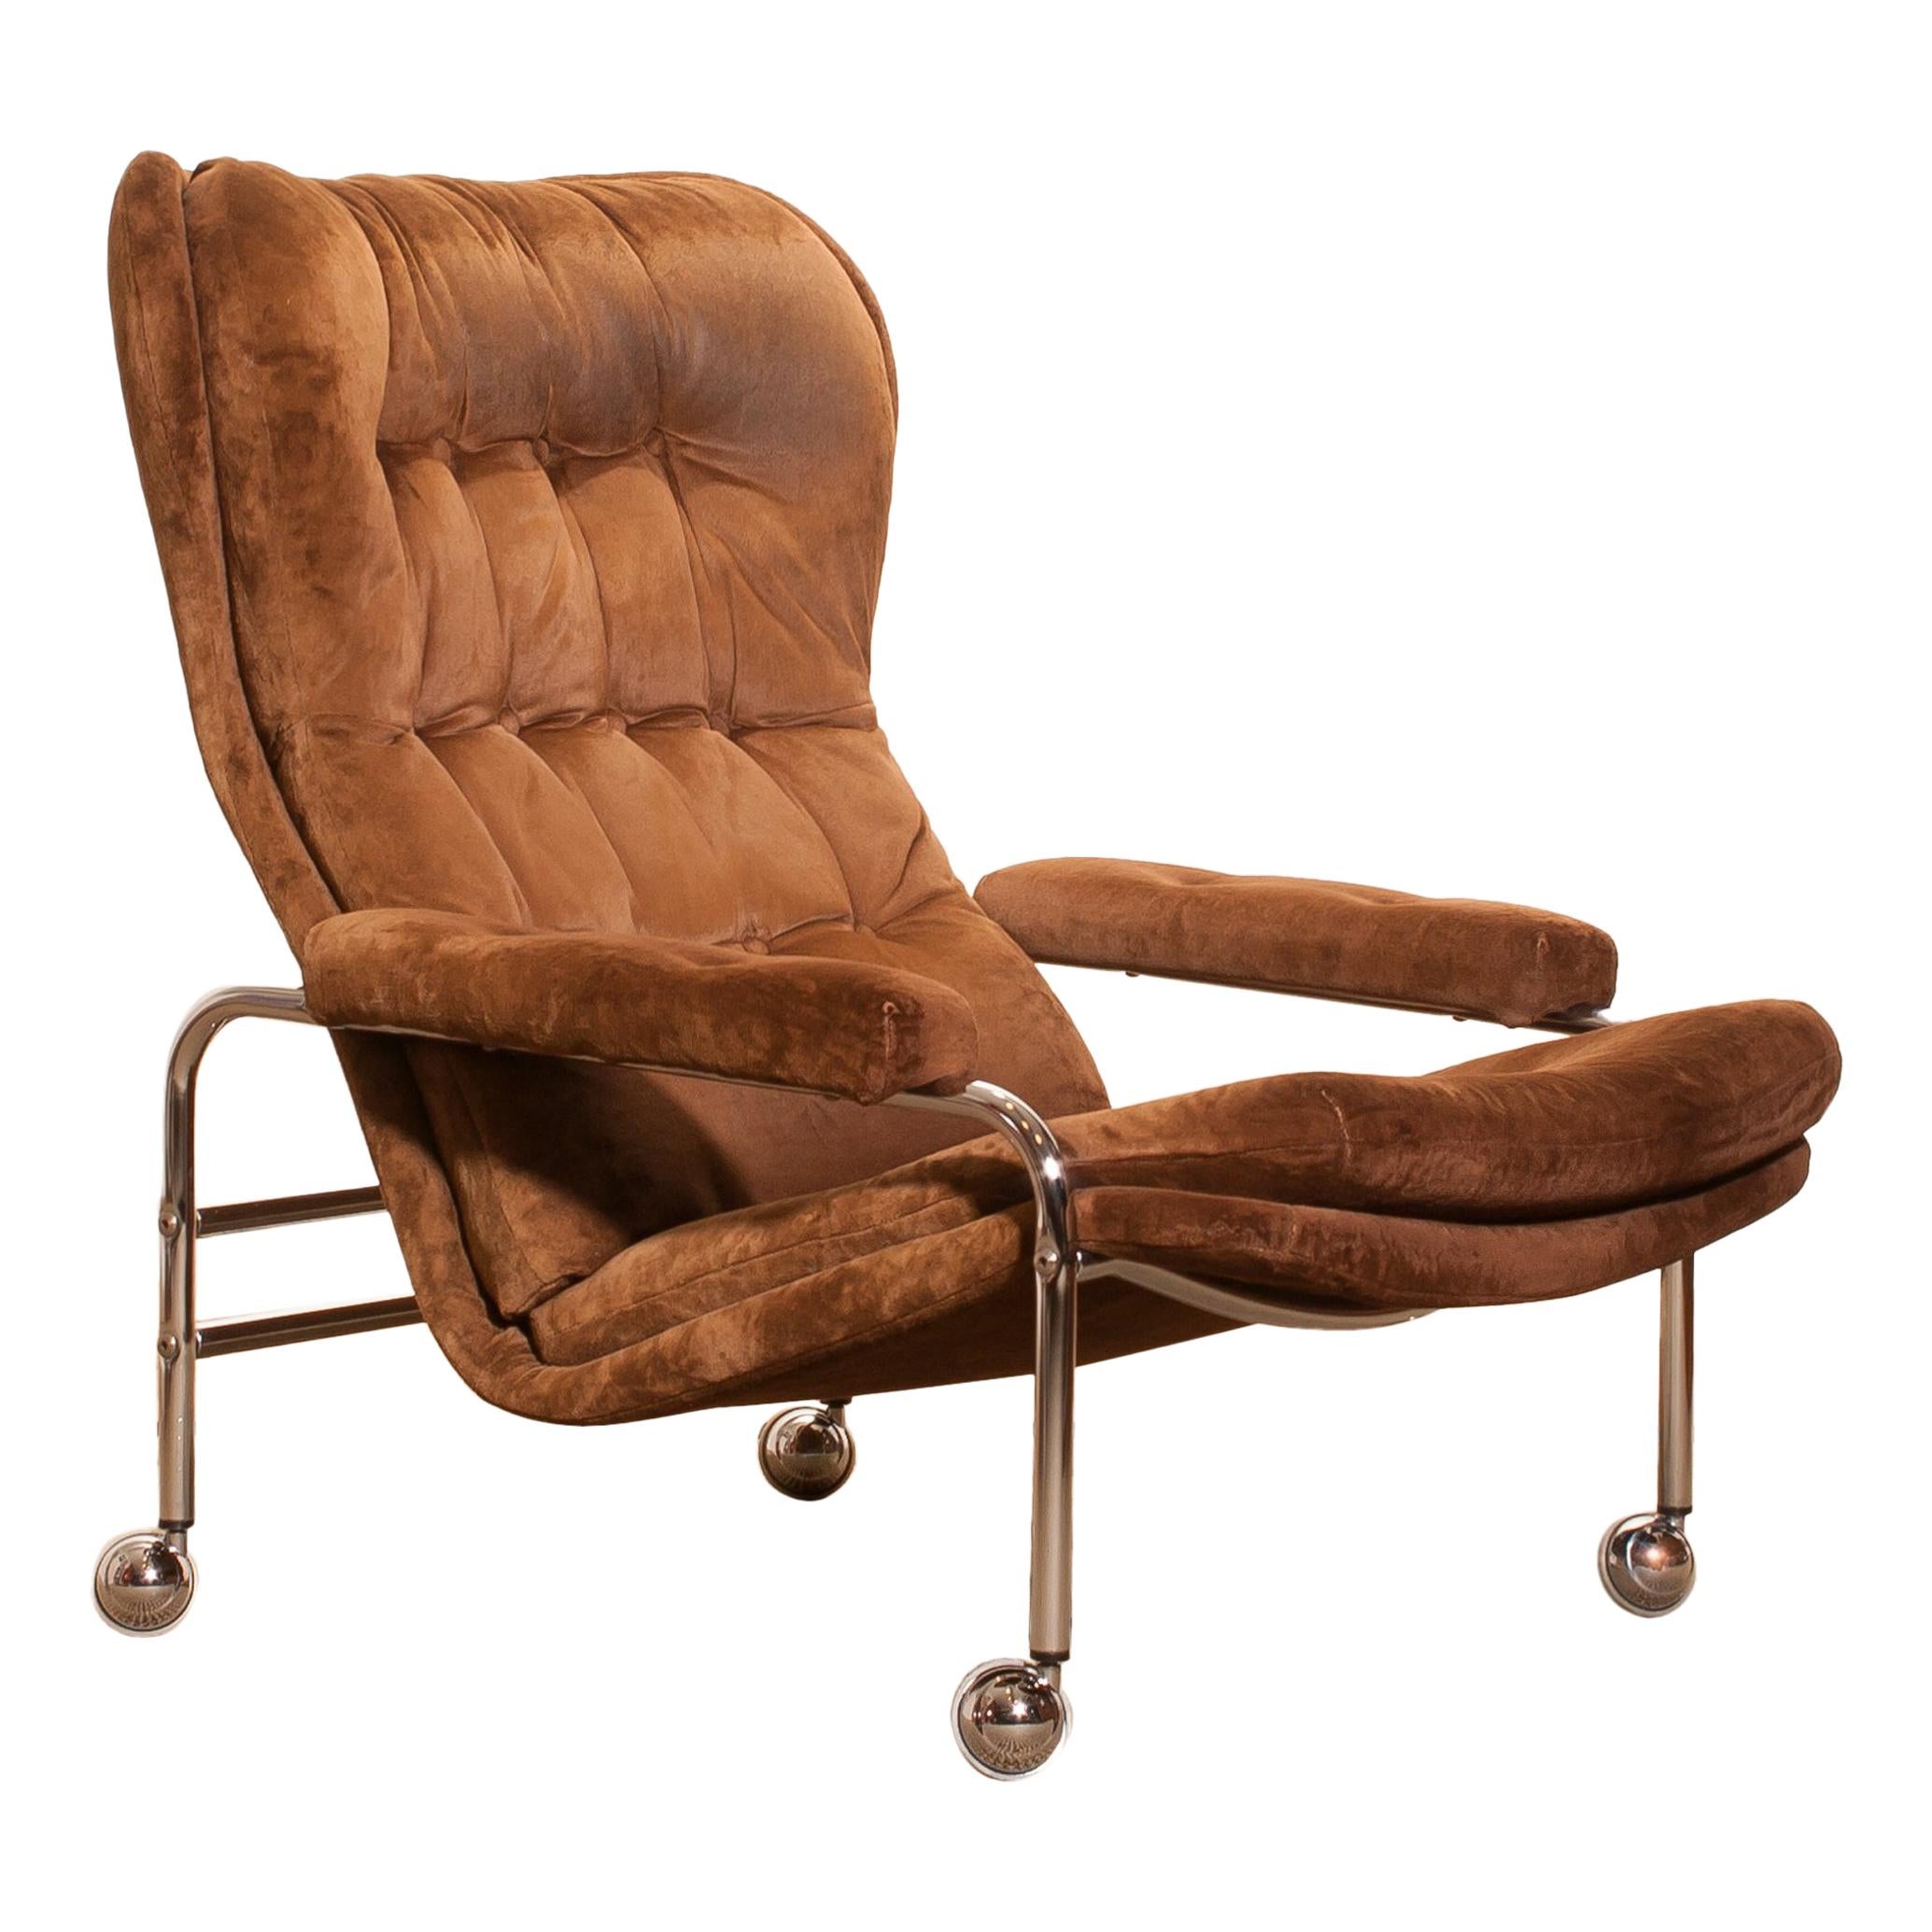 Chrome and Brown Velours Fabric Lounge Chair by Scapa Rydaholm, Sweden